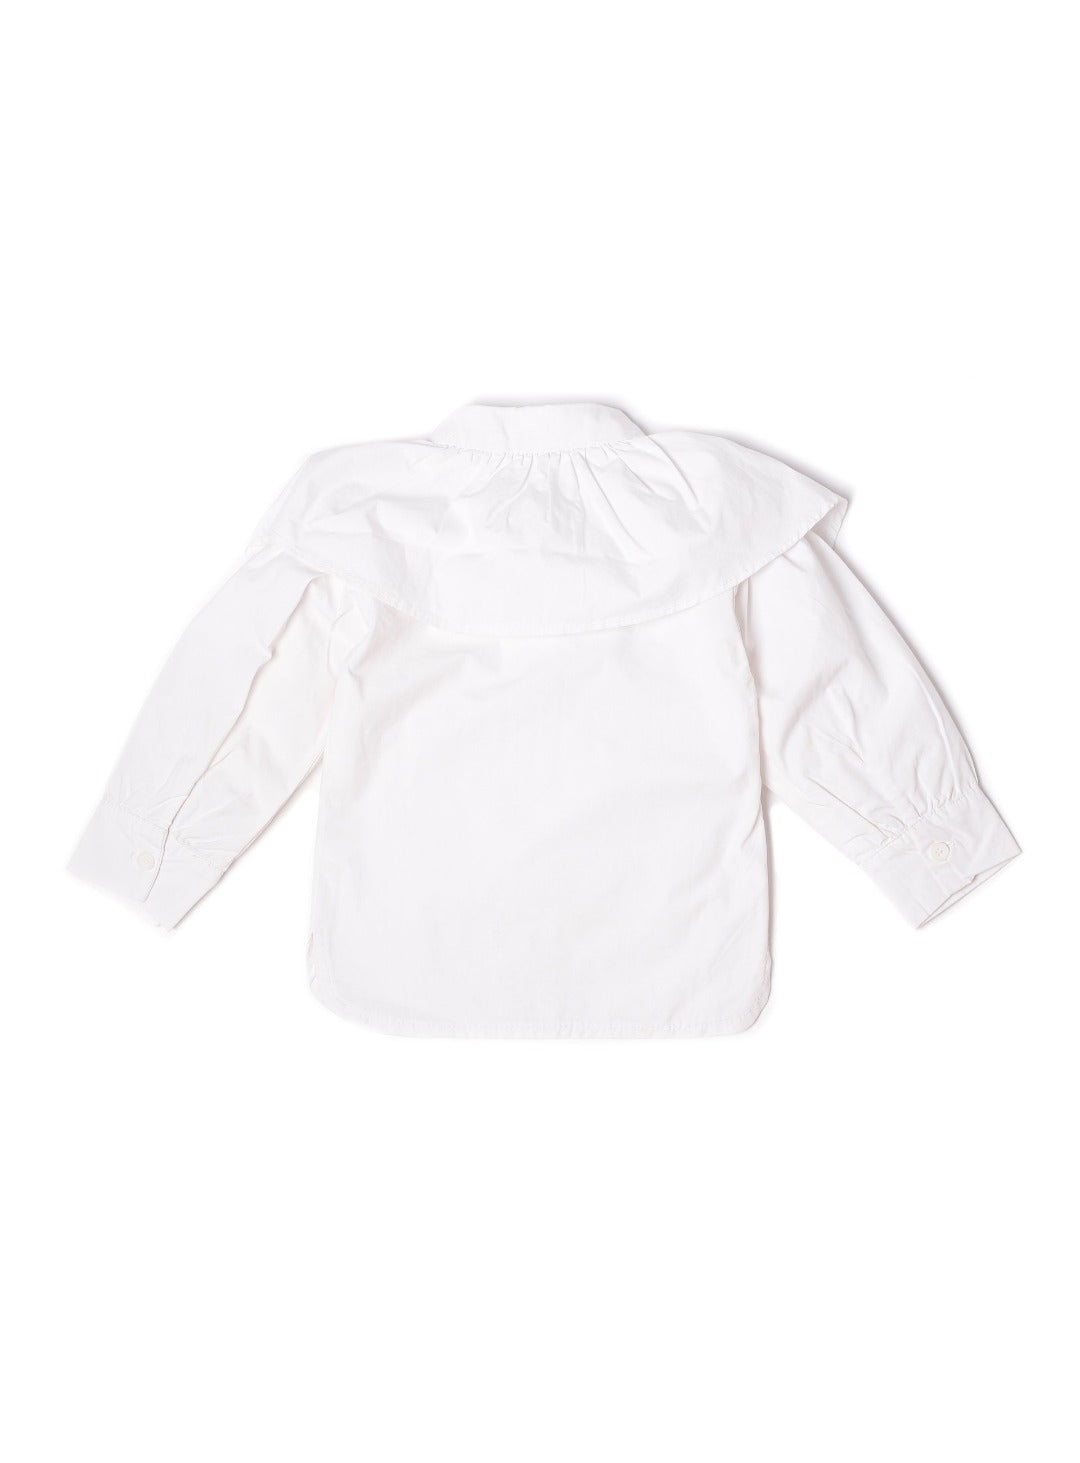 white long sleeve shirt with black bow